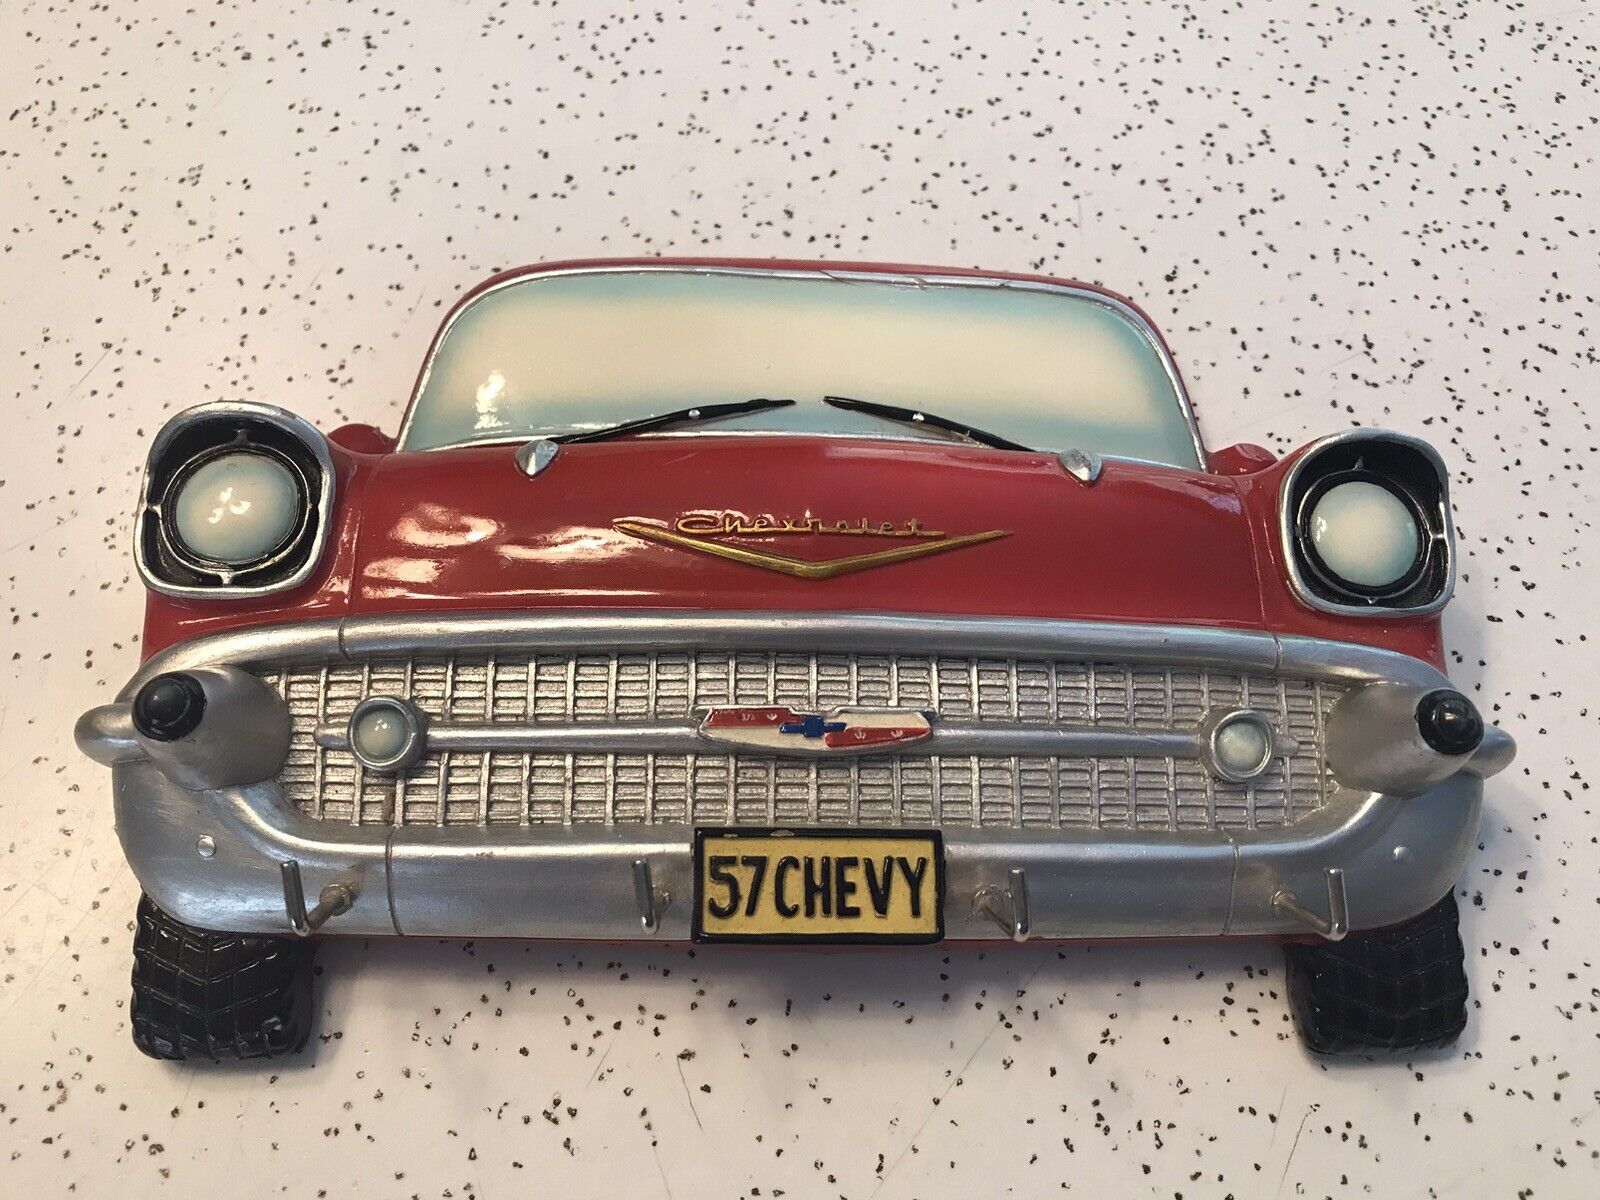 57 CHEVY Chevrolet Red Wall Mount Key Rack Hanger   Licensed by GM Resin  VG